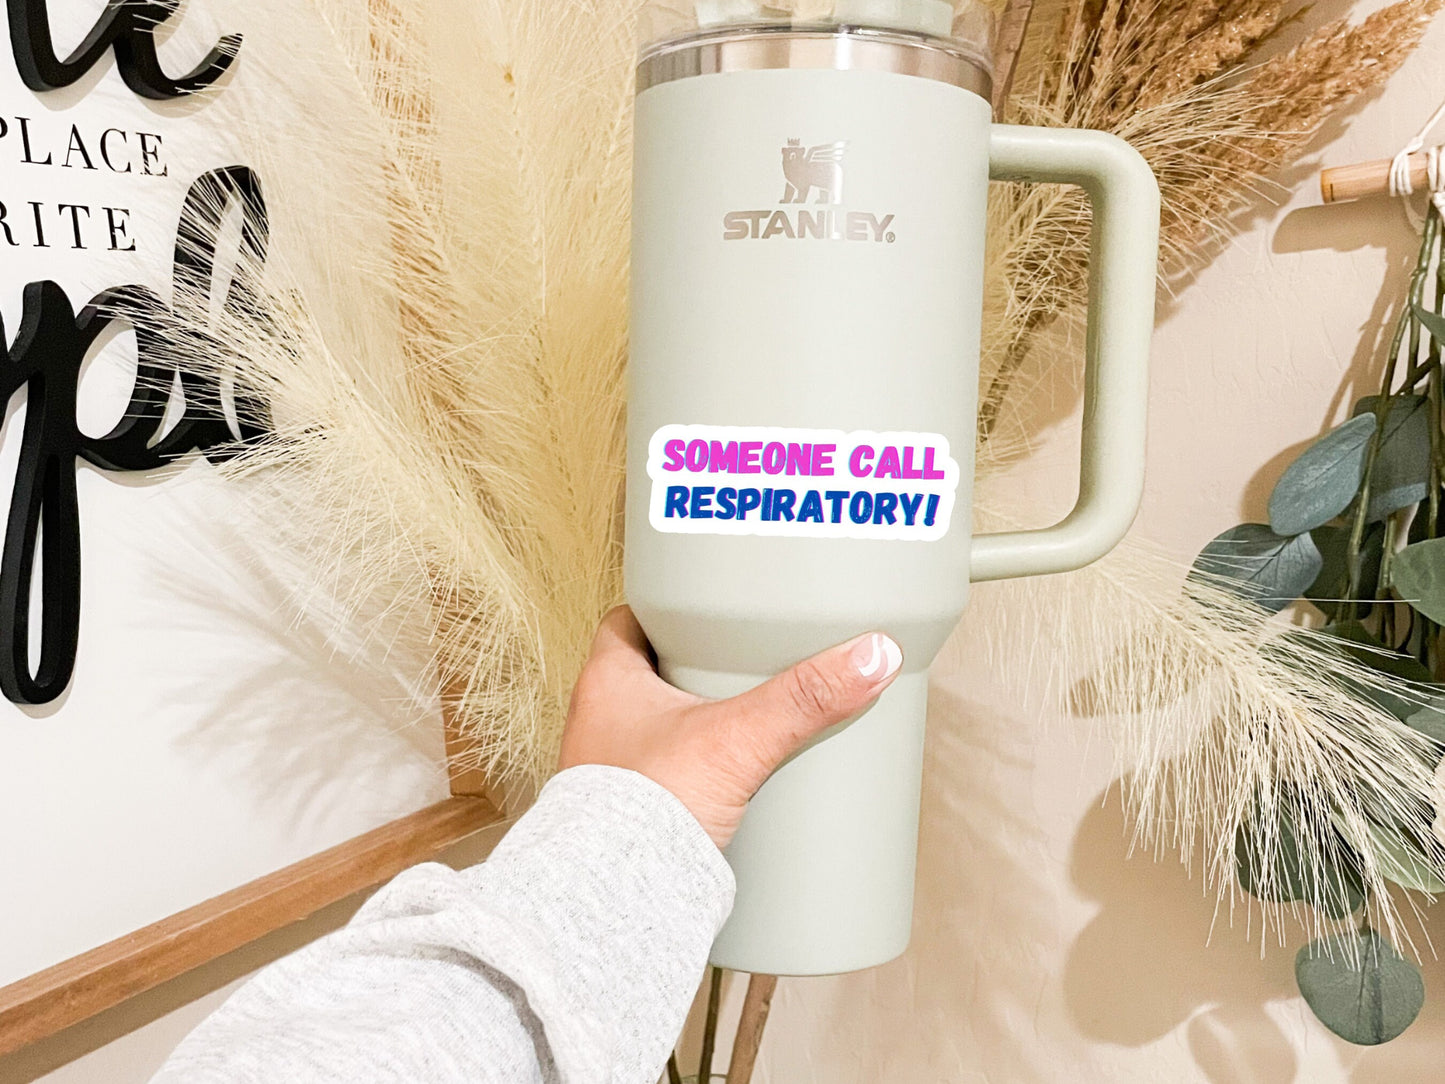 someone call respiratory, gifts for respiratory therapist, respiratory stickers, respiratory graduation gift, gifts for coworker rt